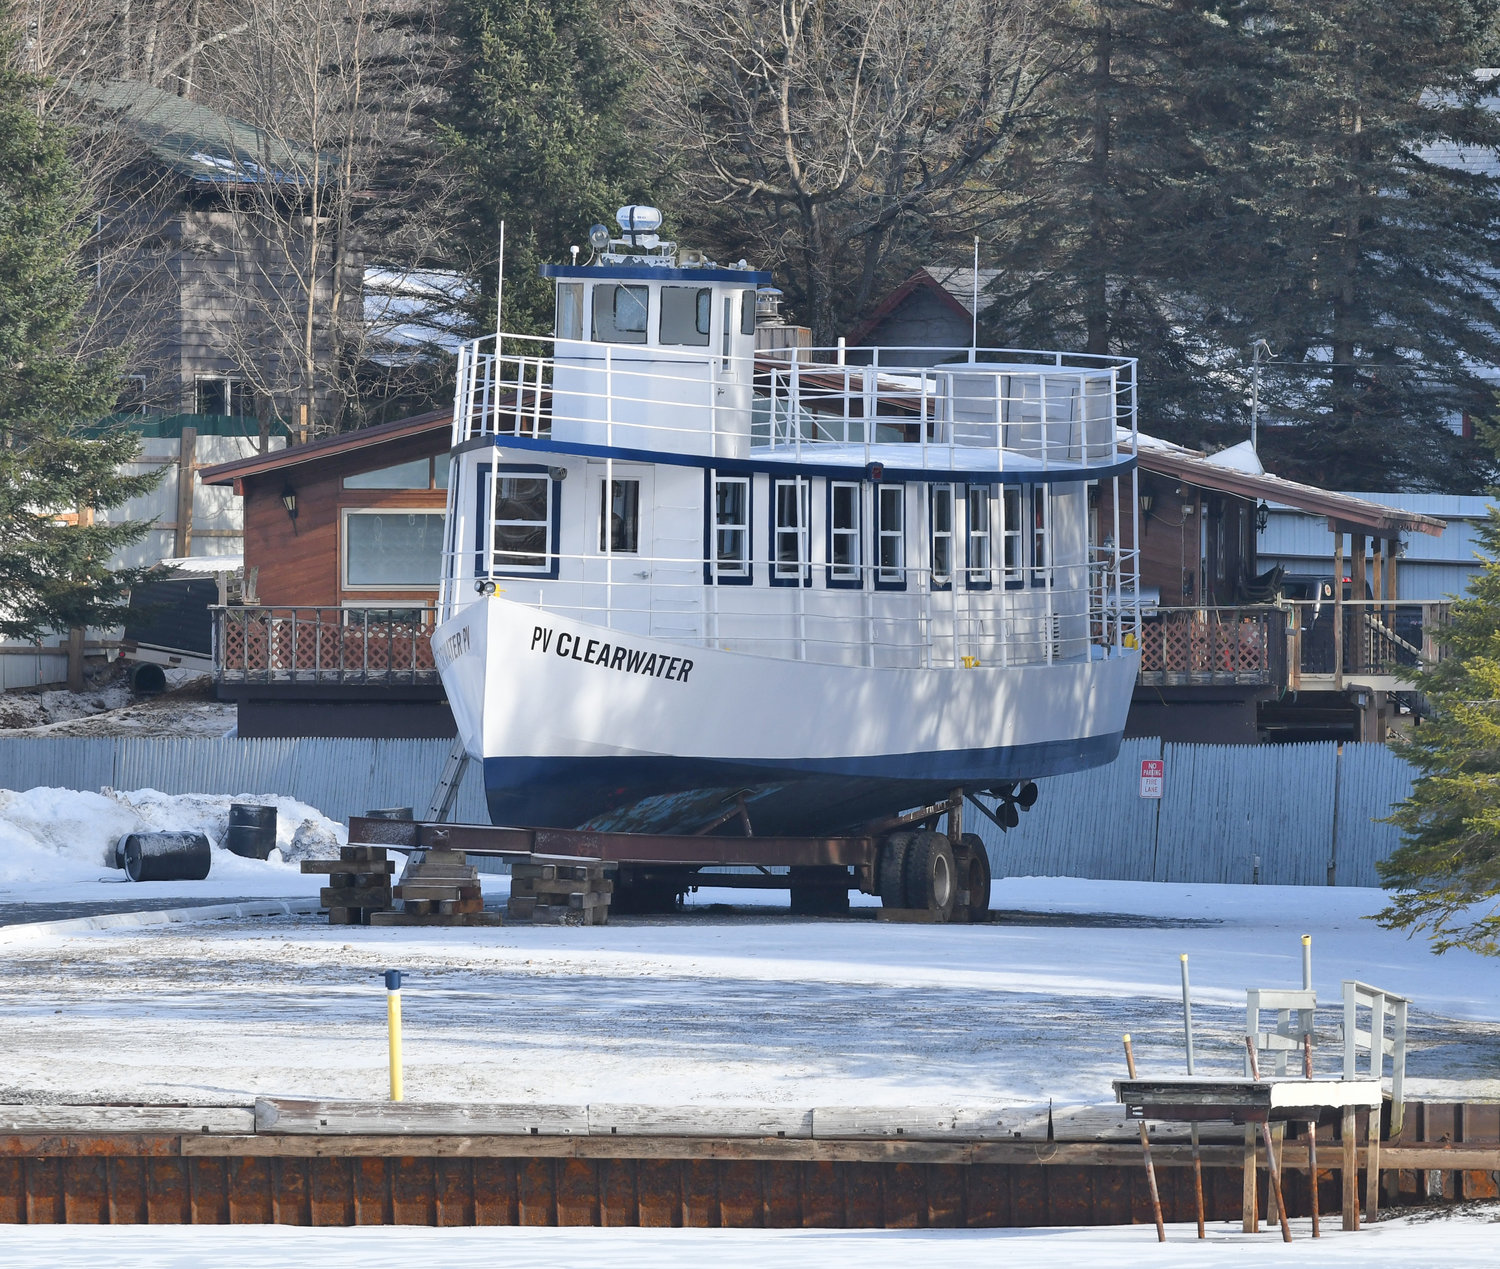 FROZEN AND DRY DOCK — The Clearwater lake-cruise boat dry docked in Old Forge with just inches of snow surrounding it on Wednesday.